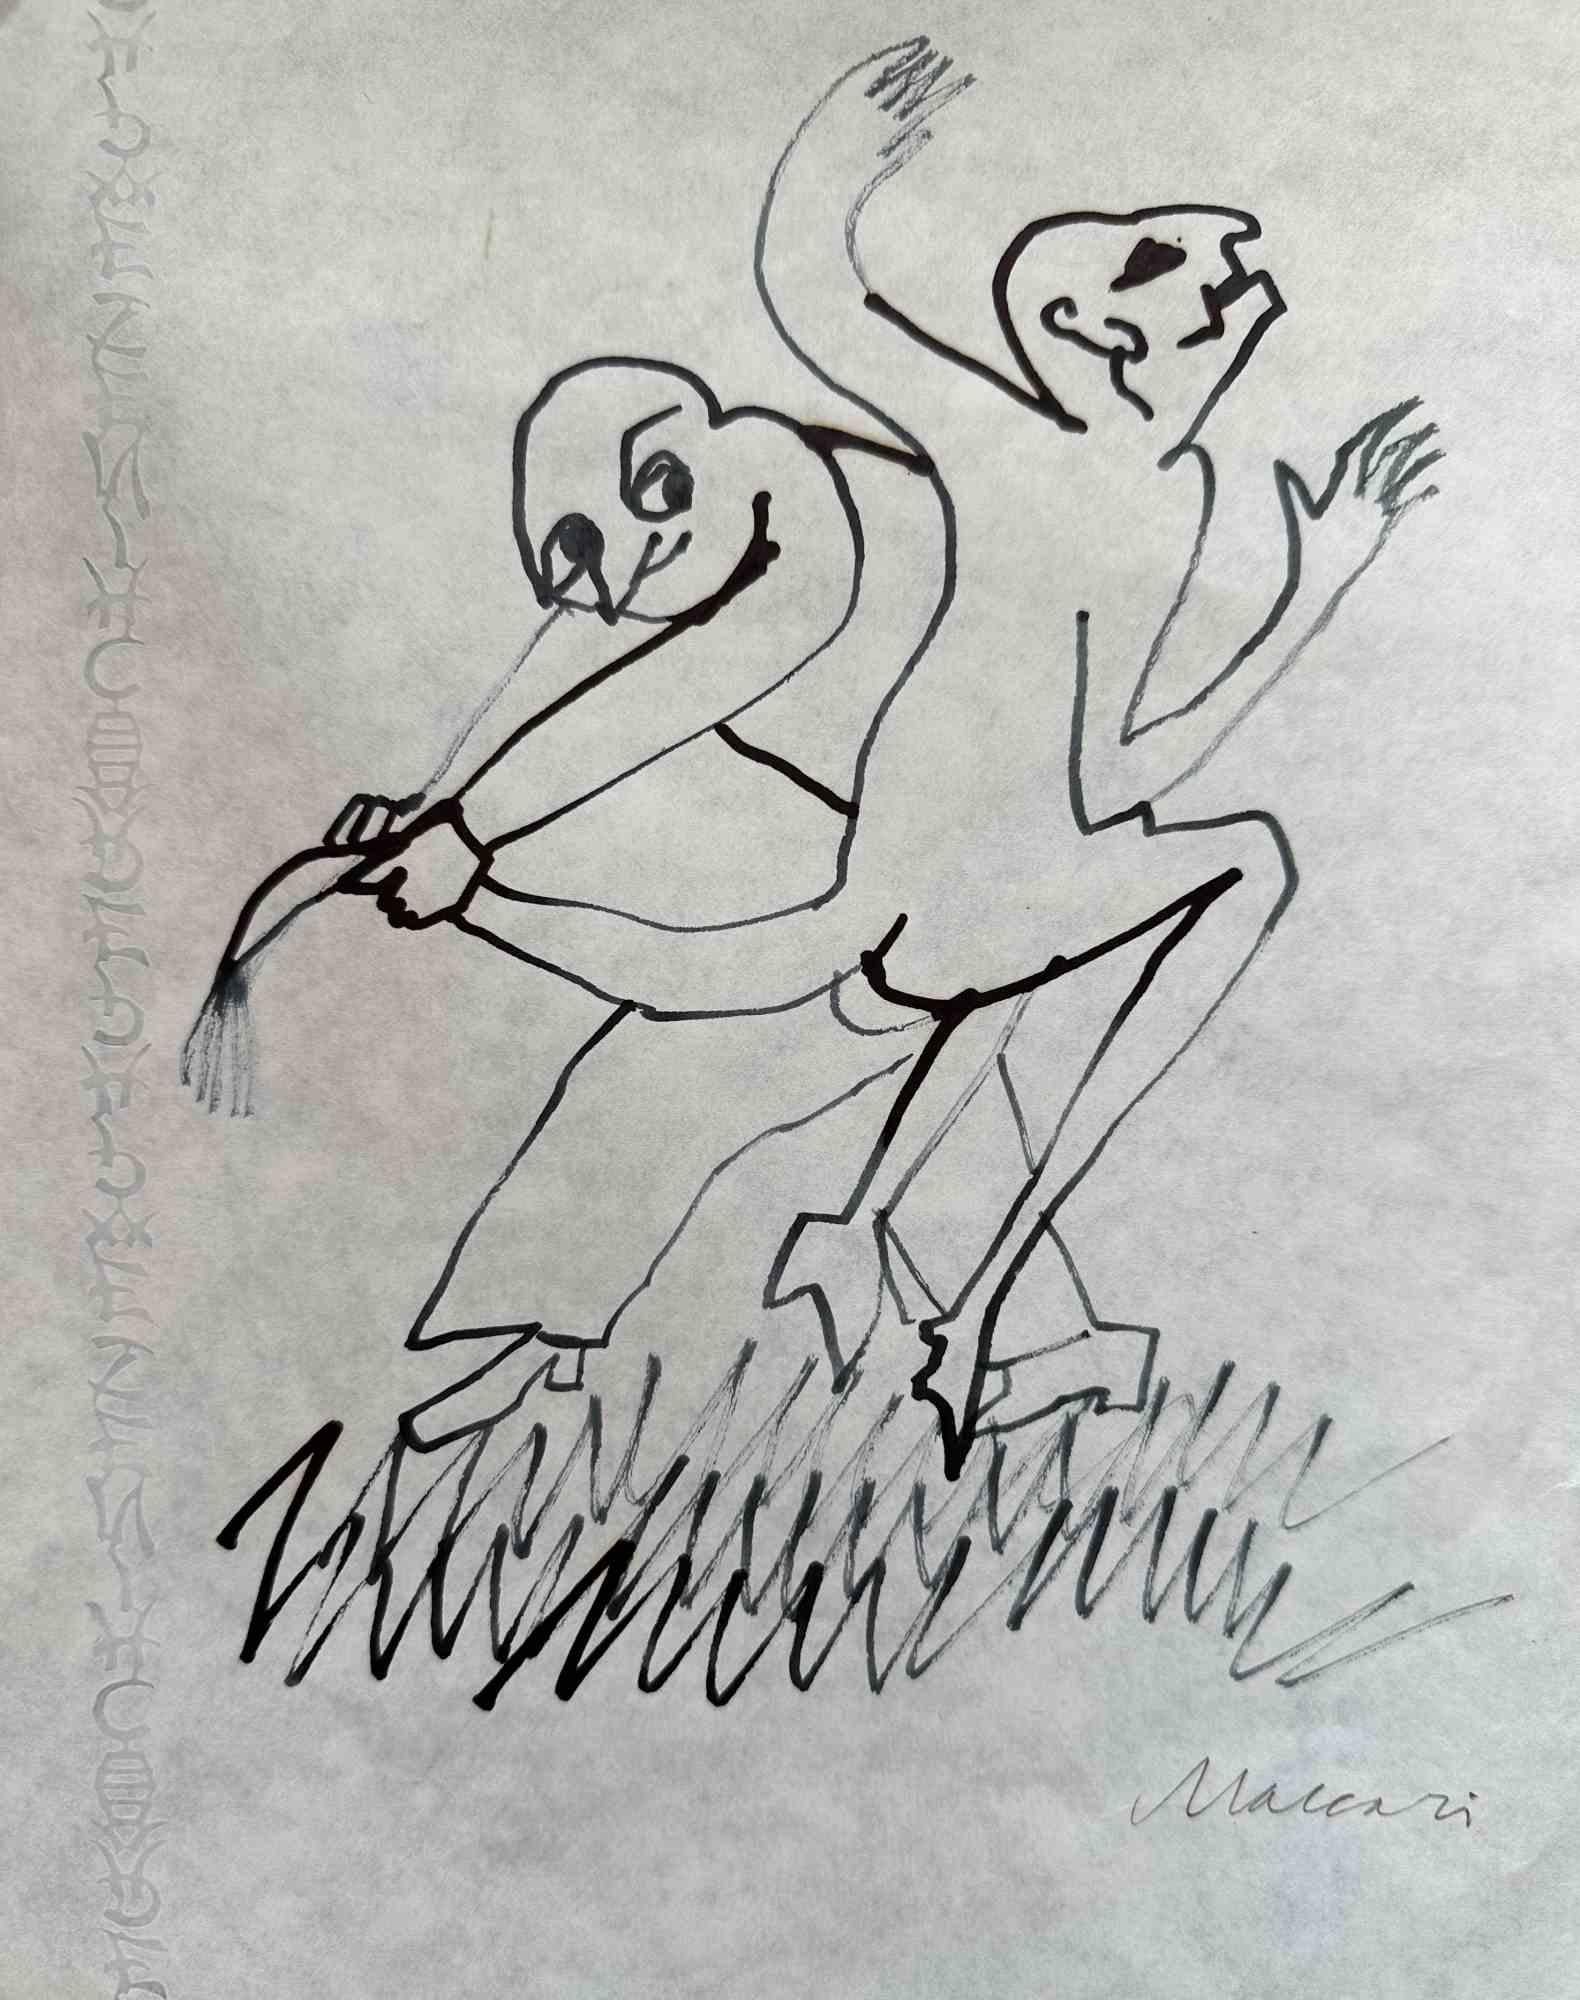 Dancing Figures is a china ink drawing realized by Mino Maccari in 1975.

Hand-signed in the lower right part.

Good conditions with slight folding.

Mino Maccari (Siena, 1924-Rome, June 16, 1989) was an Italian writer, painter, engraver and